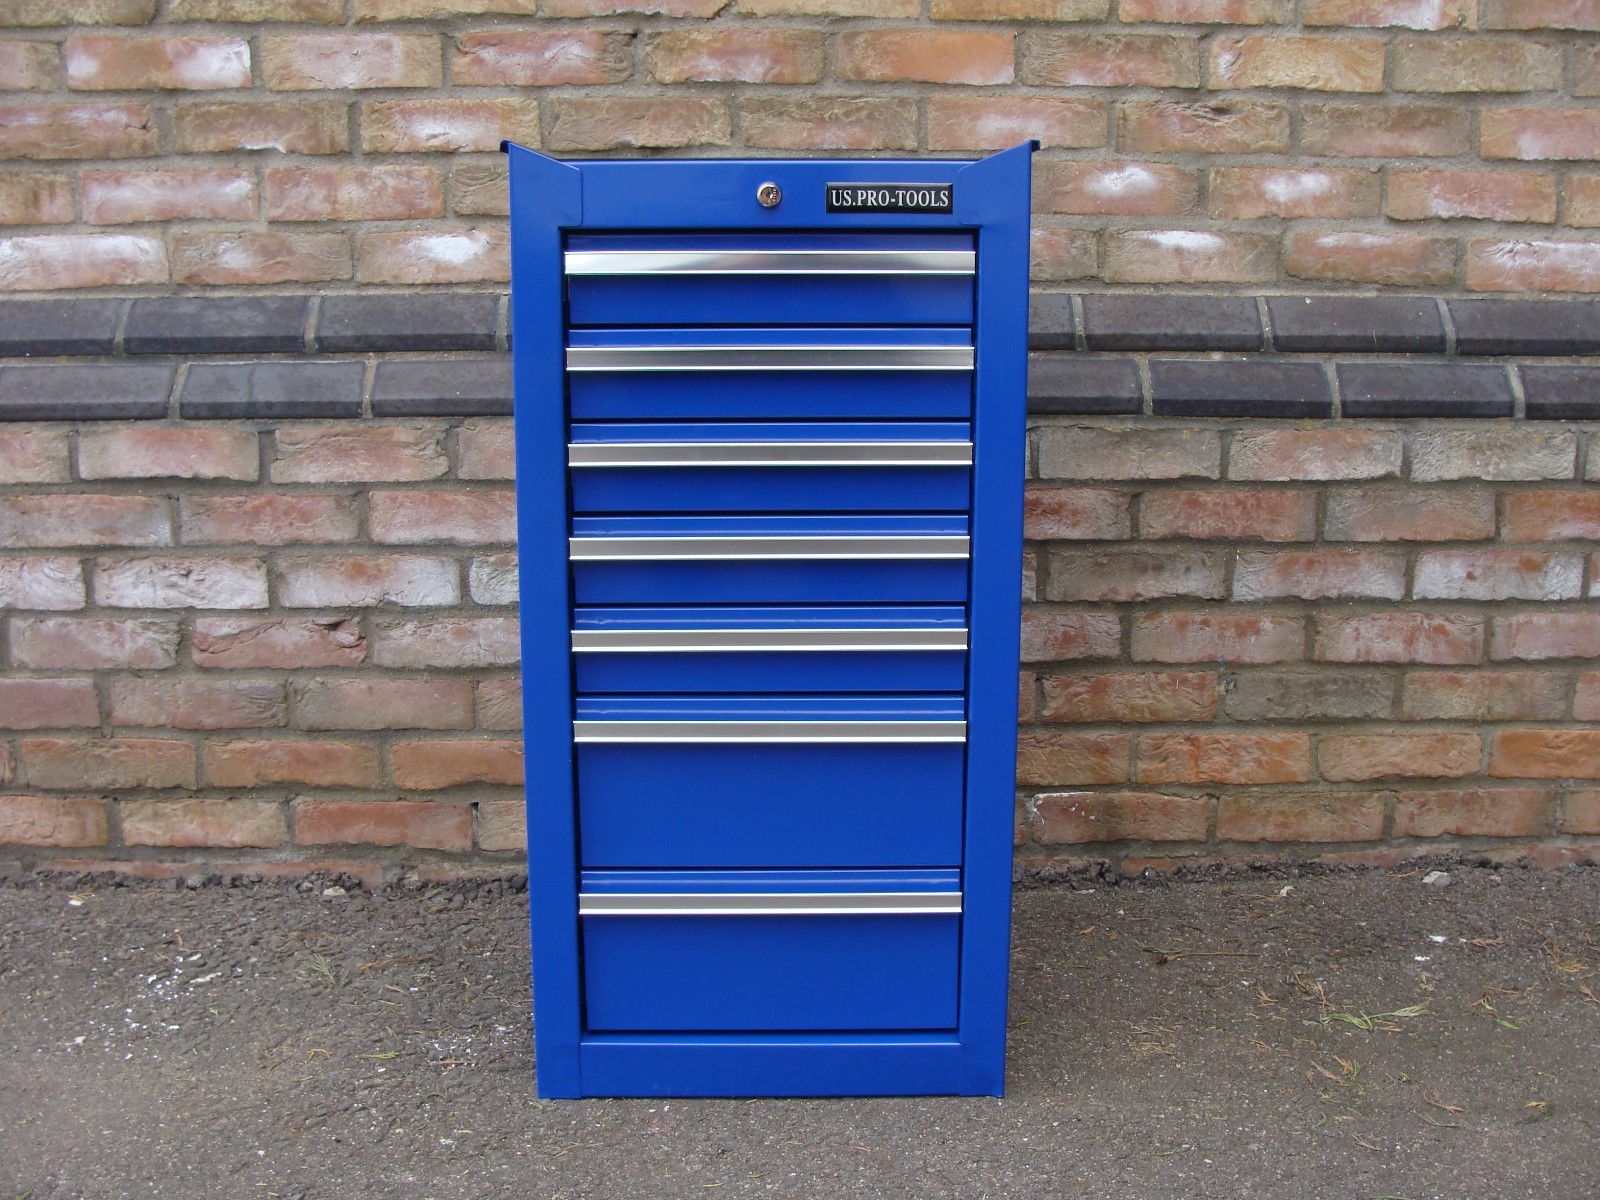 SIDE TOOL CABINET TOOL CHEST BOX ADD STACK ON US PRO